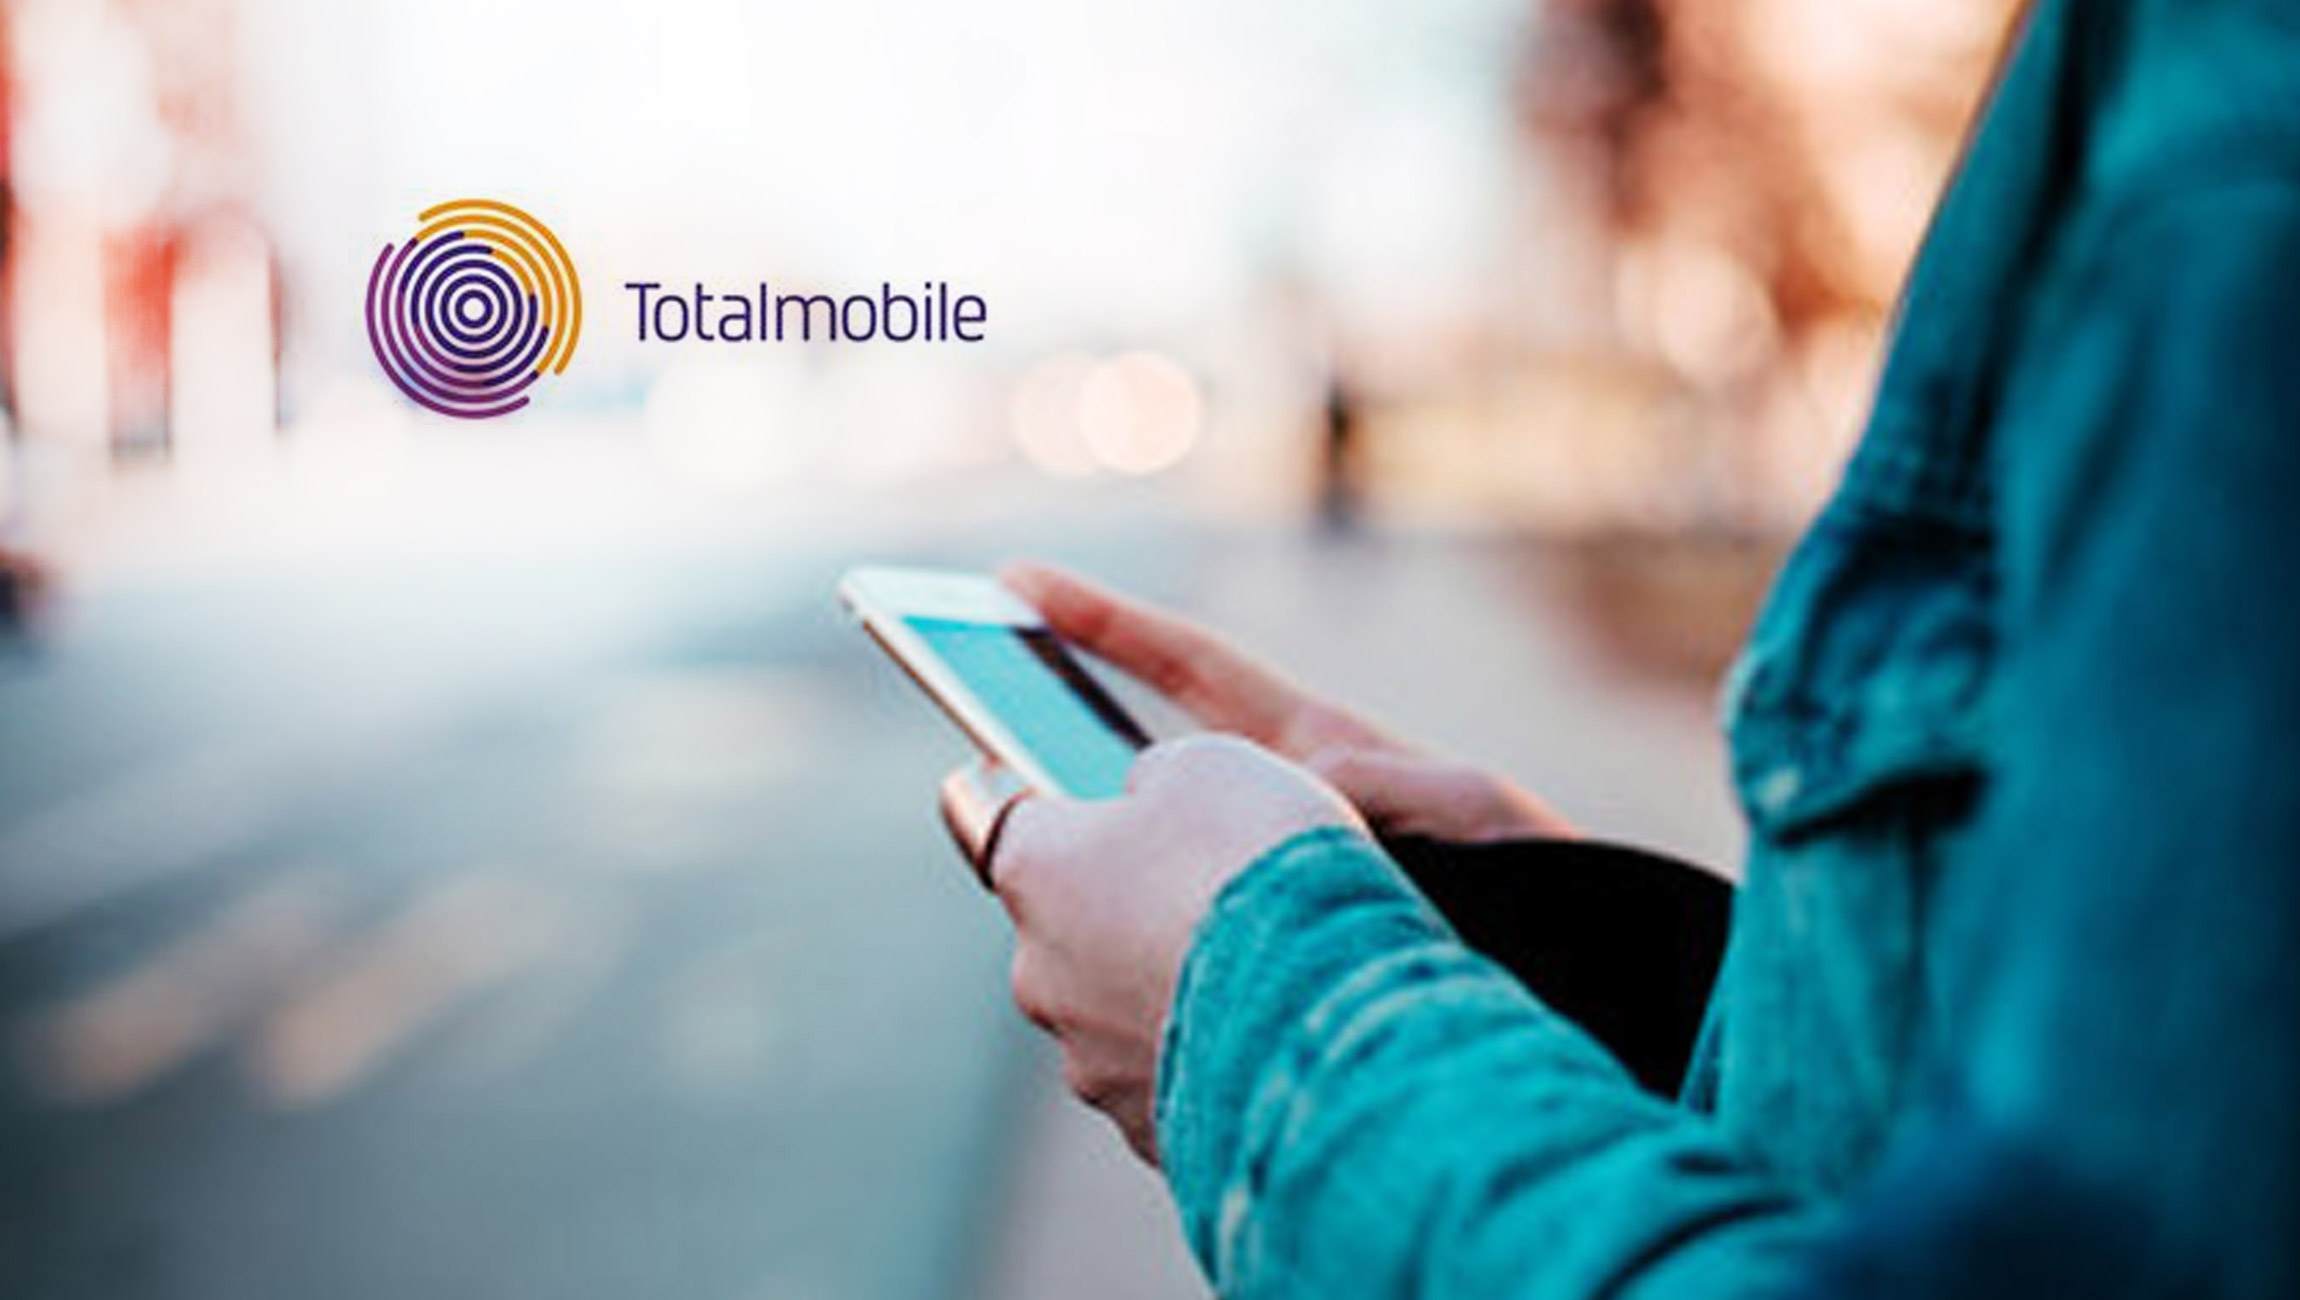 Totalmobile Launches Field Service Intelligence Solution Allowing Customers to Review Operational Performance as Services Take Place